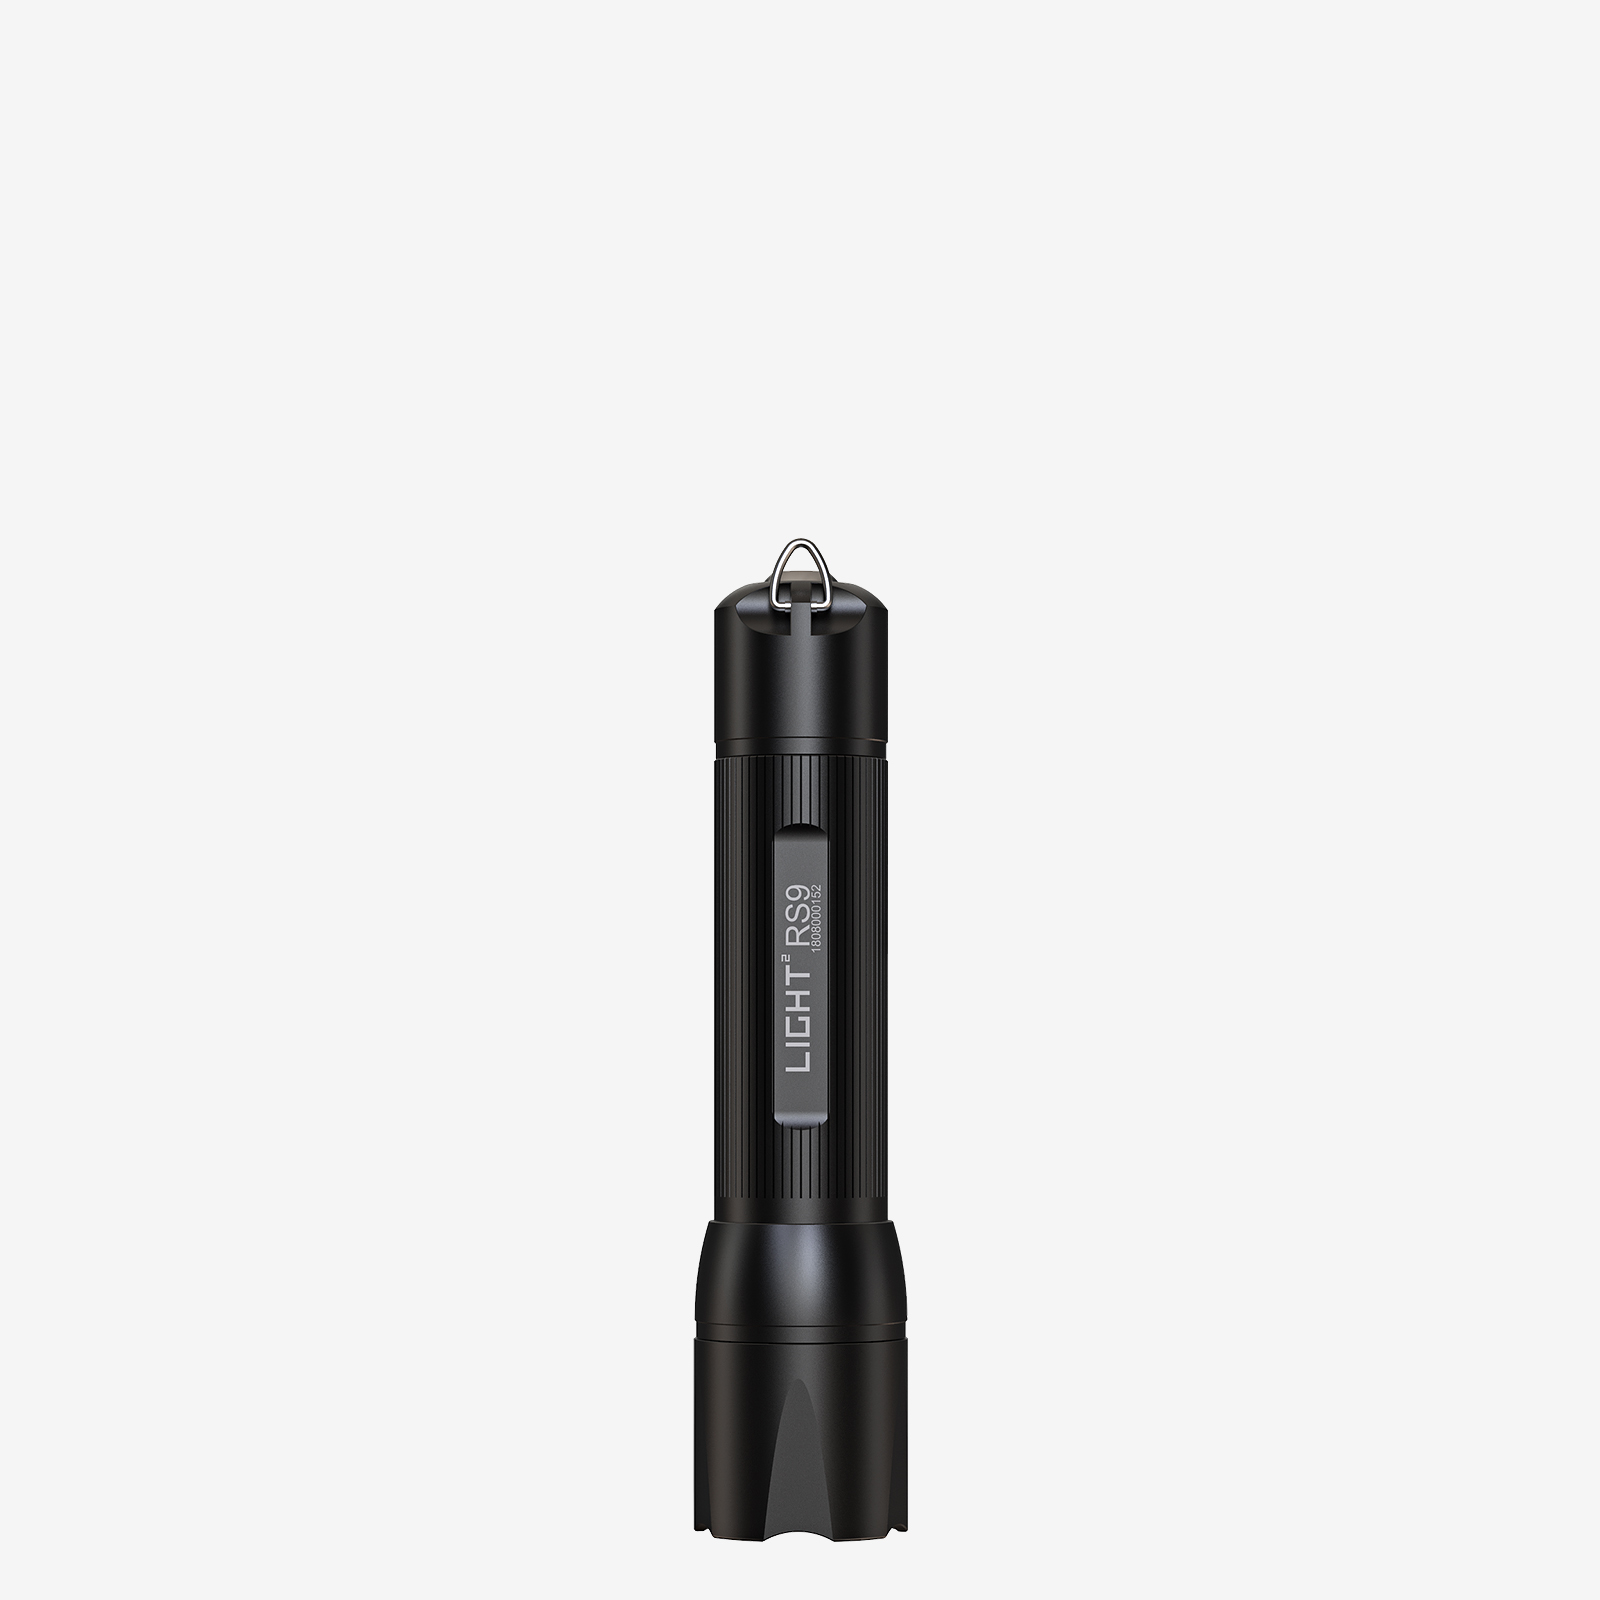 RS9 LED Torch